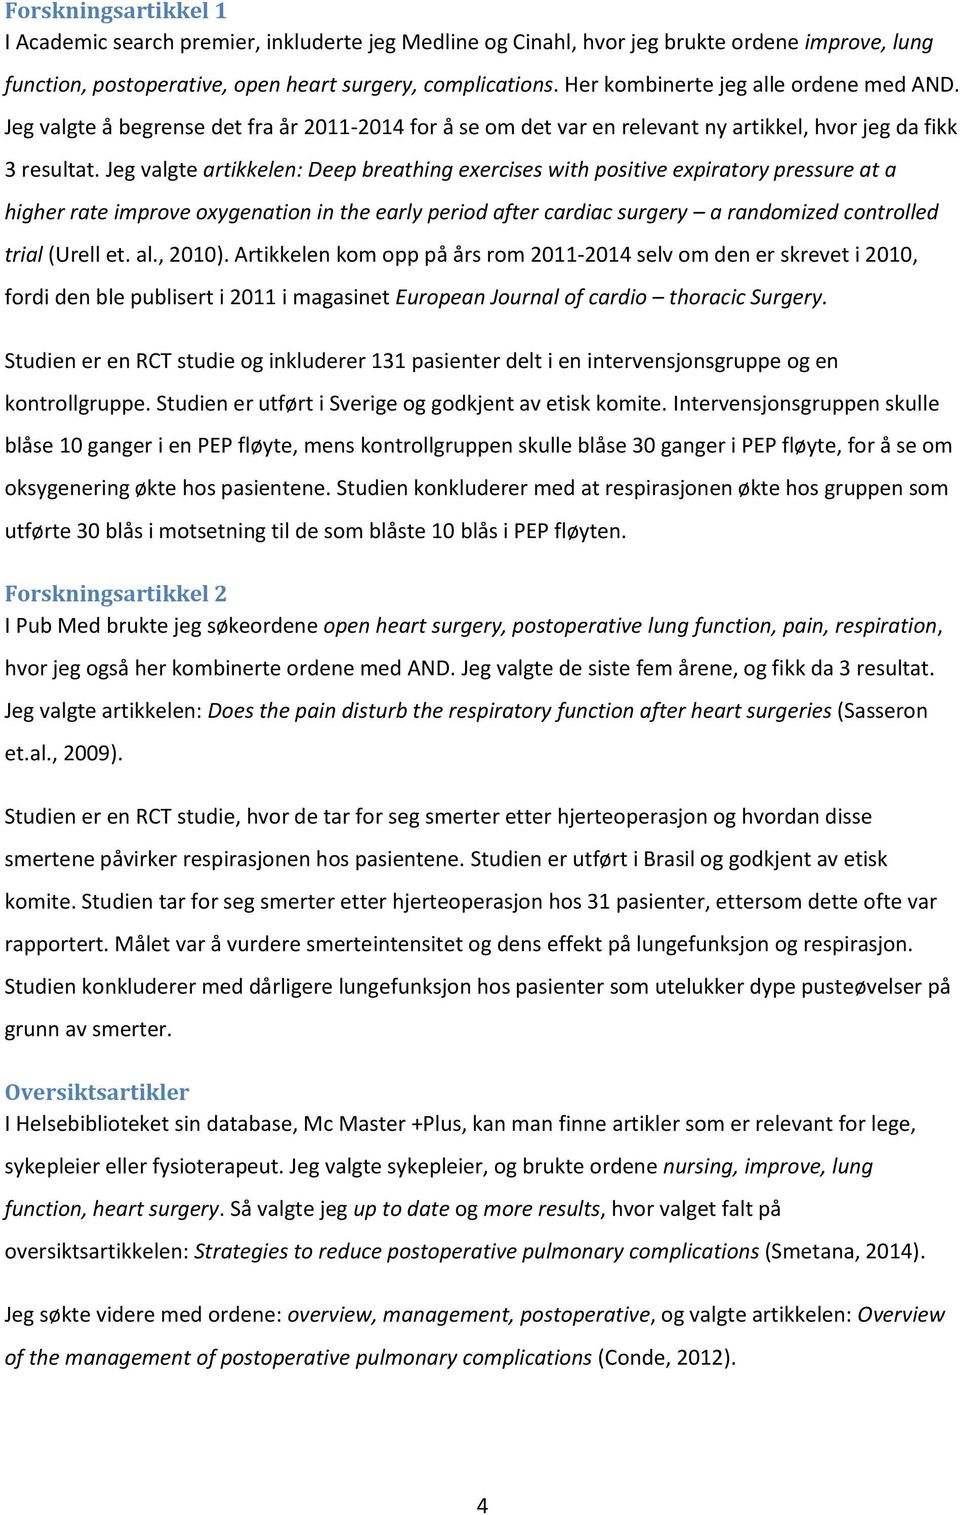 Jeg valgte artikkelen: Deep breathing exercises with positive expiratory pressure at a higher rate improve oxygenation in the early period after cardiac surgery a randomized controlled trial (Urell